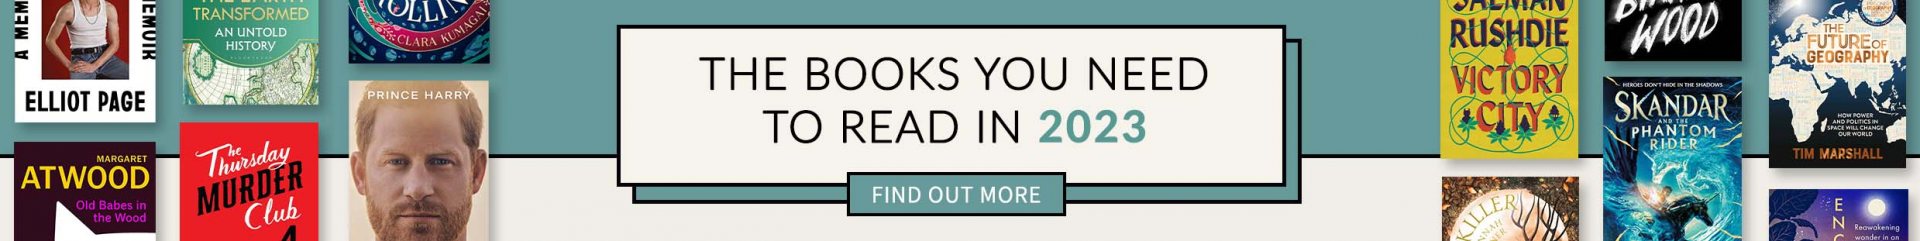 The Books You Need to Read in 2023 | Find Out More